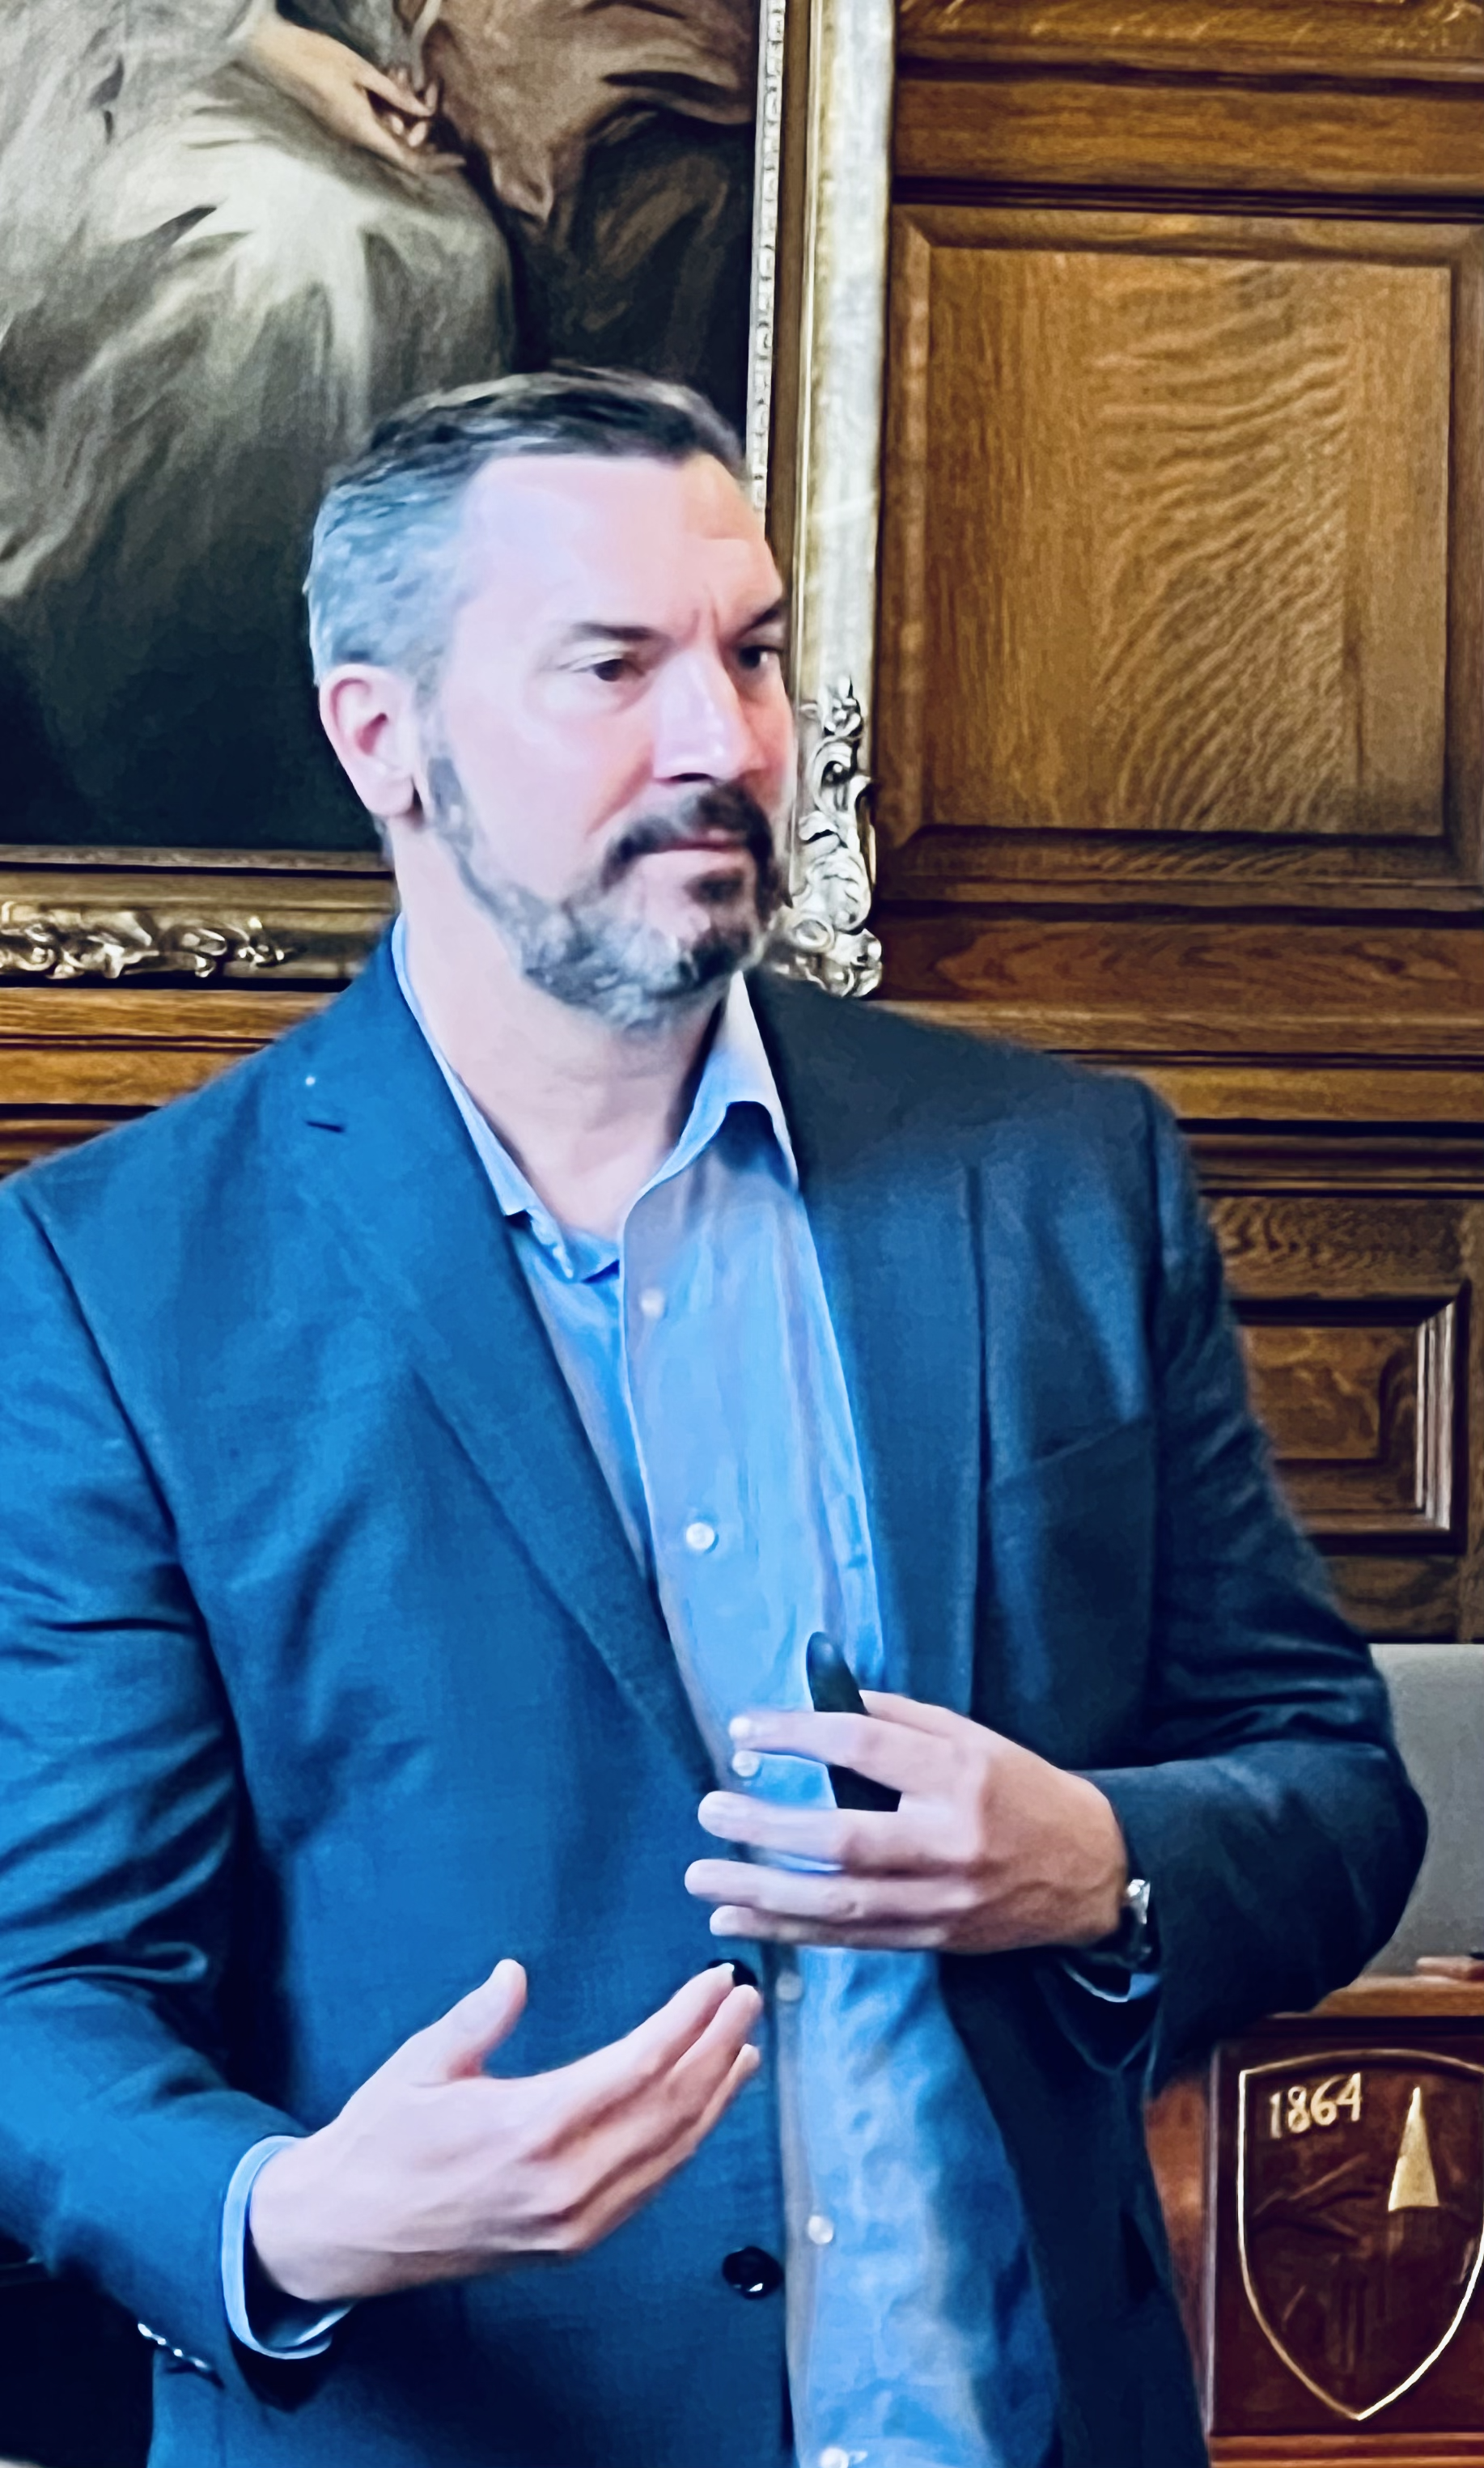 Scott Arthur is pictured presenting in a blue blazer with a thoughtful expression on his face.